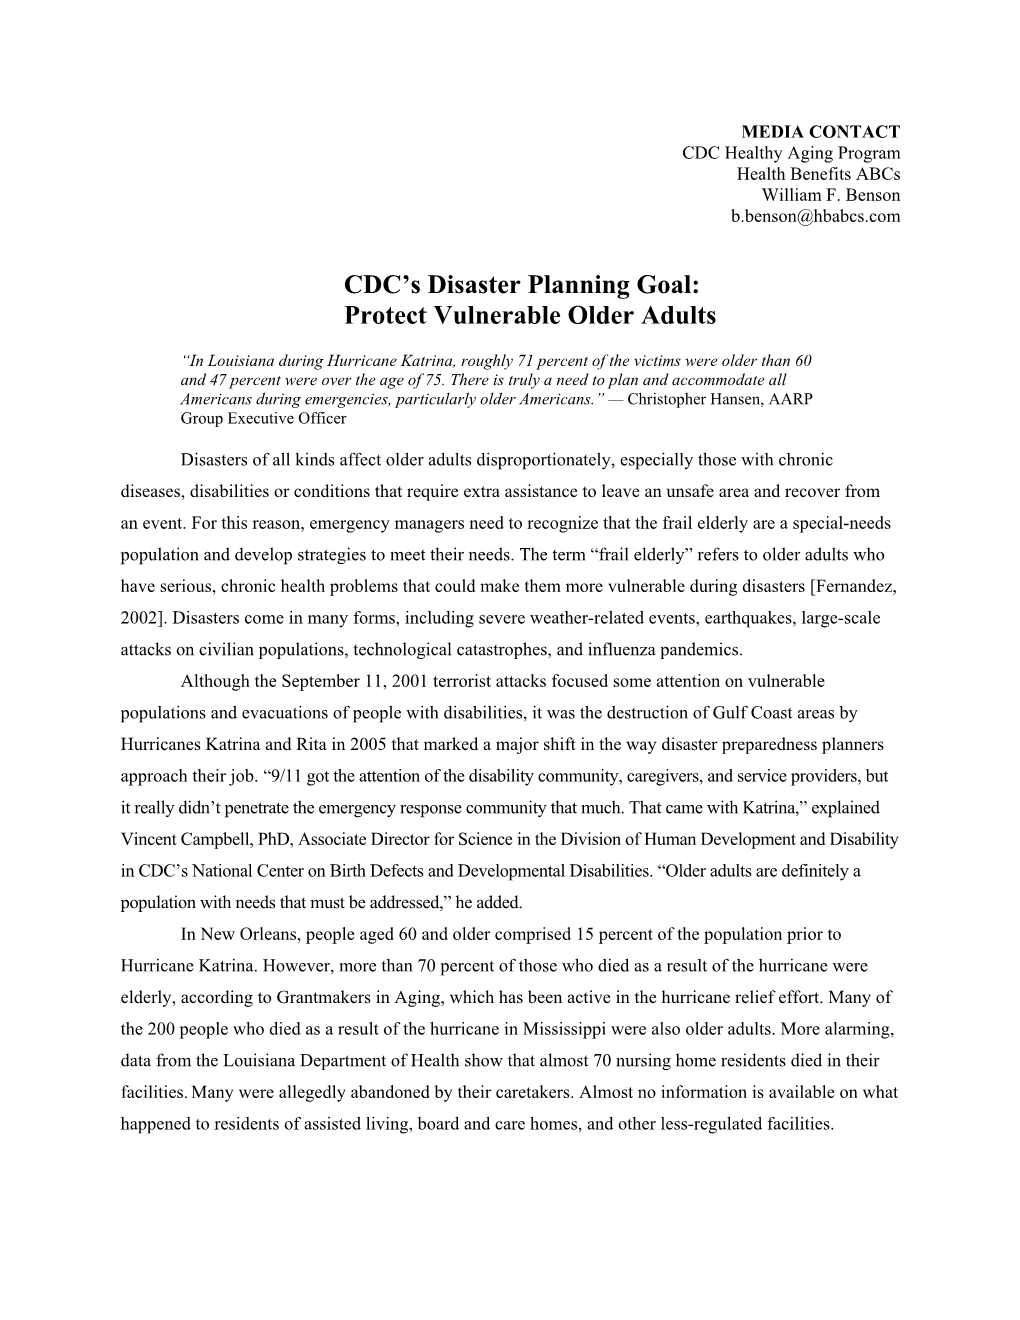 CDC's Disaster Planning Goal: Protect Vulnerable Older Adults